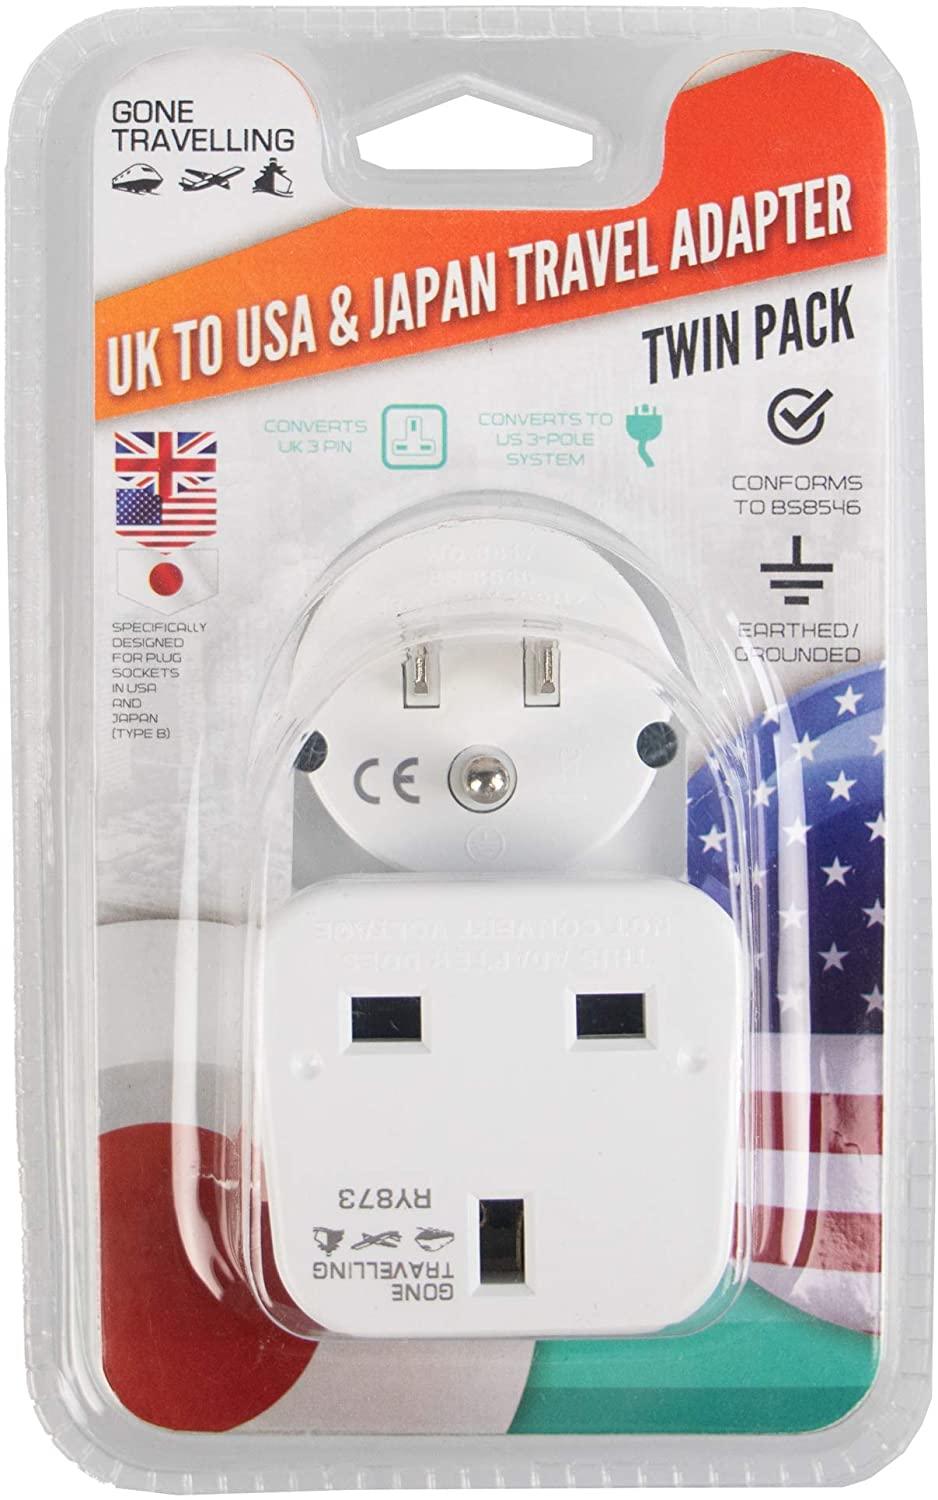 uk to usa travel adapter gone travelling